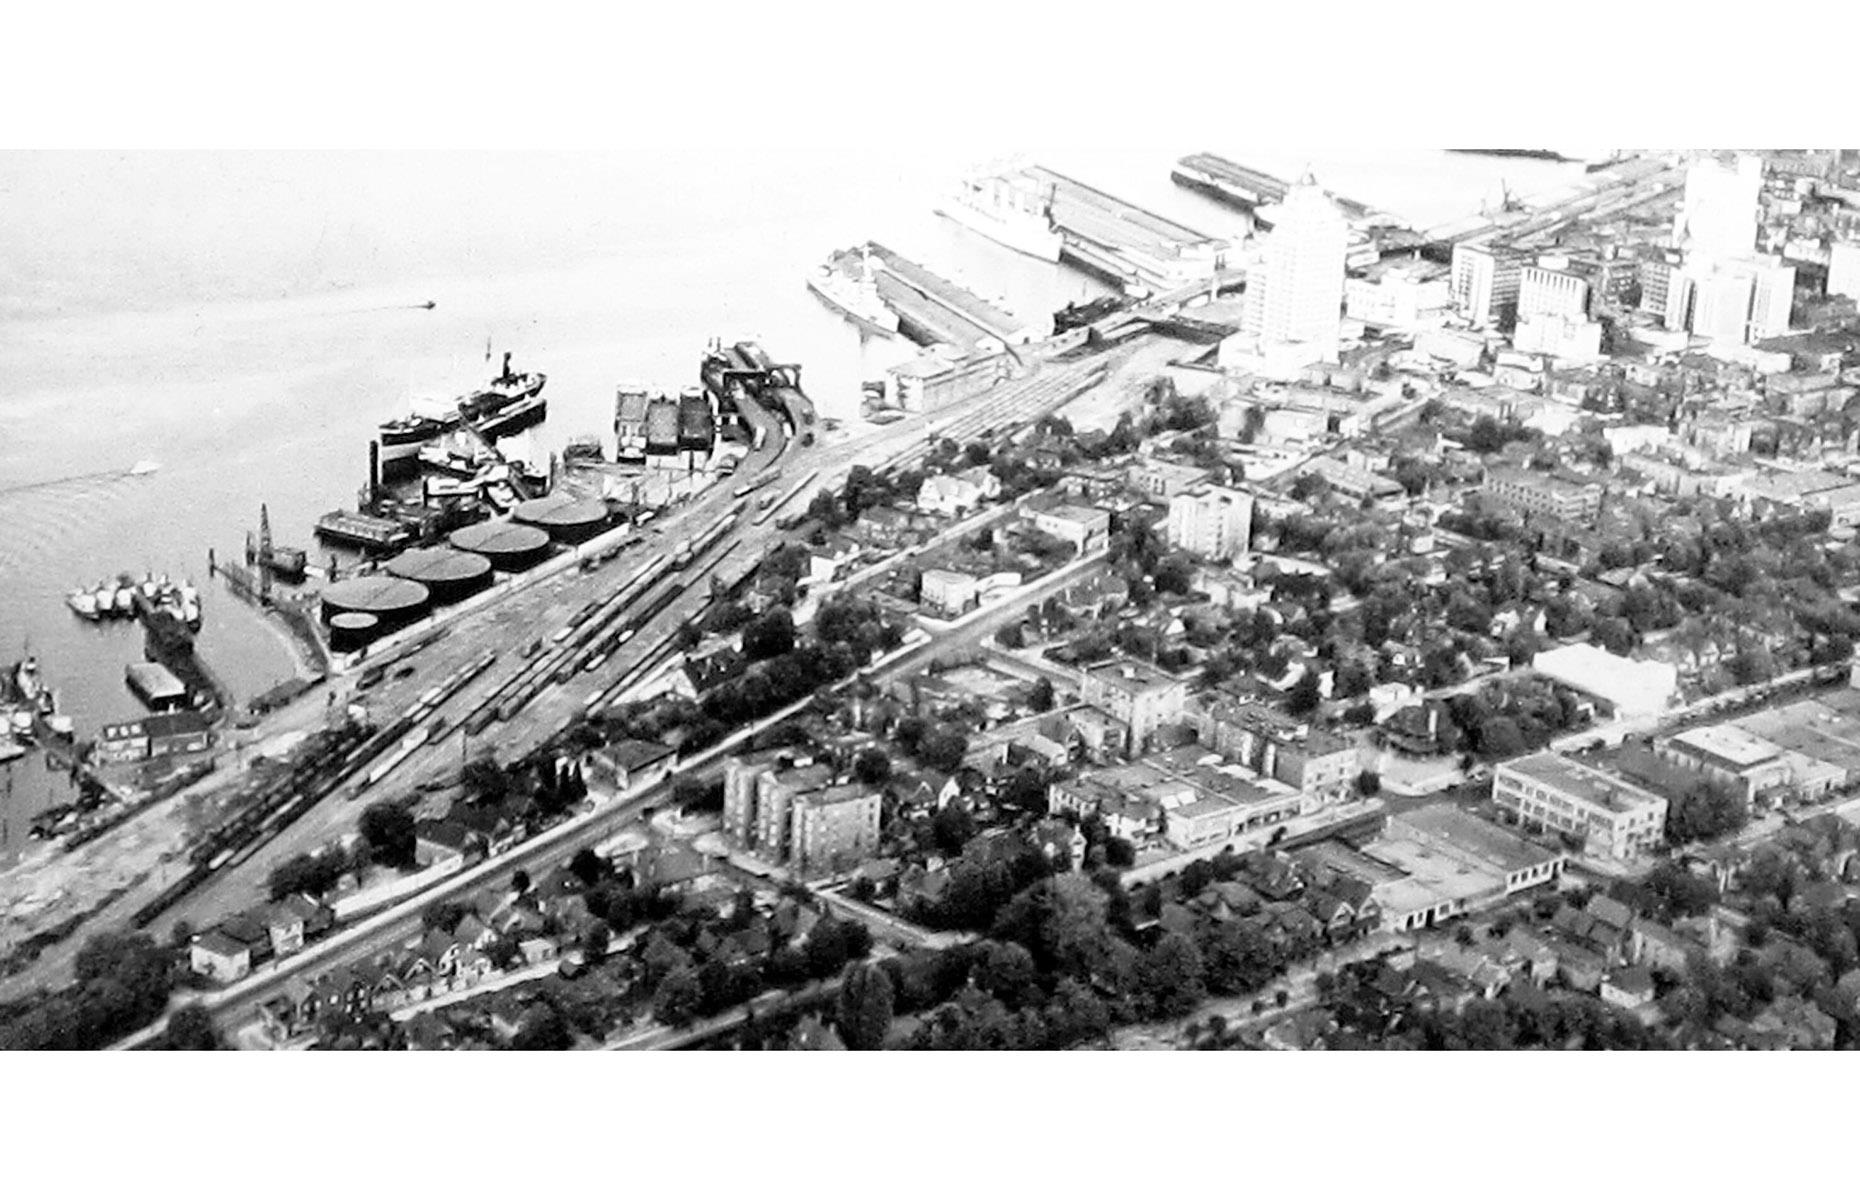 <p>When this photo was taken in the early 1900s, the Port of Vancouver (Canada’s largest) was just emerging as a major shipping hub. Its first terminal, initially built for cargo ships, was established at Ballantyne Pier in the 1920s, but it took a further six decades for Vancouver’s passenger cruise industry to really boom. The state-of-the-art Canada Place cruise ship terminal – which can dock up to four luxury cruise ships at once – was completed in the mid-1980s, and remains one of the most striking structures on the port’s waterfront.</p>